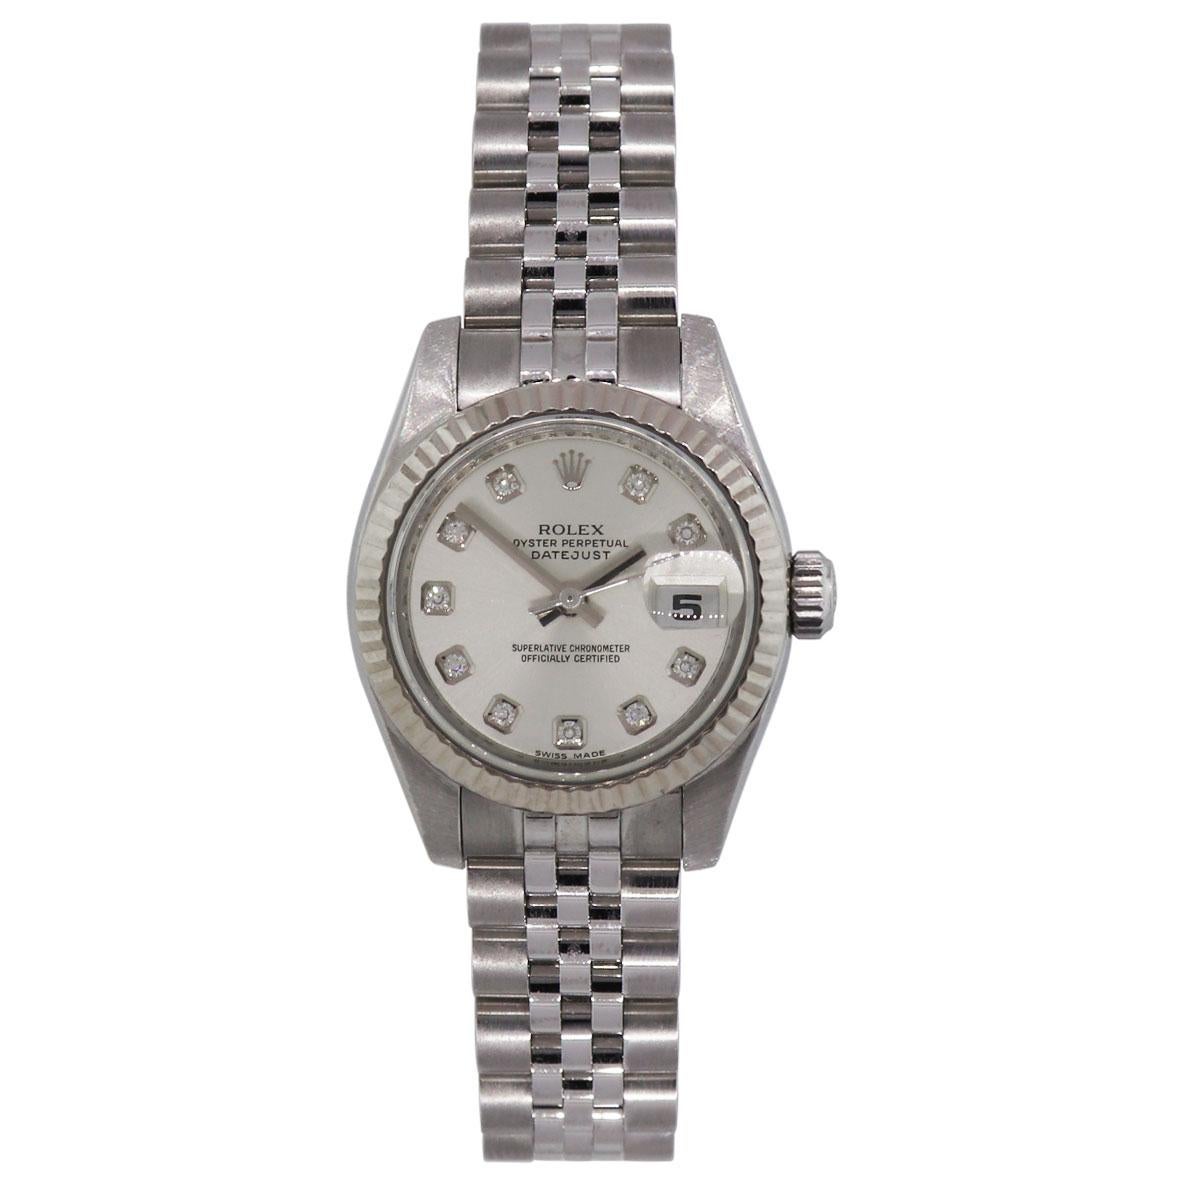 Brand: Rolex
MPN: 179174
Model: Datejust
Case Material: Stainless steel
Case Diameter: 26mm
Crystal: Scratch resistant sapphire
Bezel: 18k white gold bezel
Dial: Silver diamond dial
Bracelet: Stainless steel jubilee band
Size: Will fit up to a 5.75″